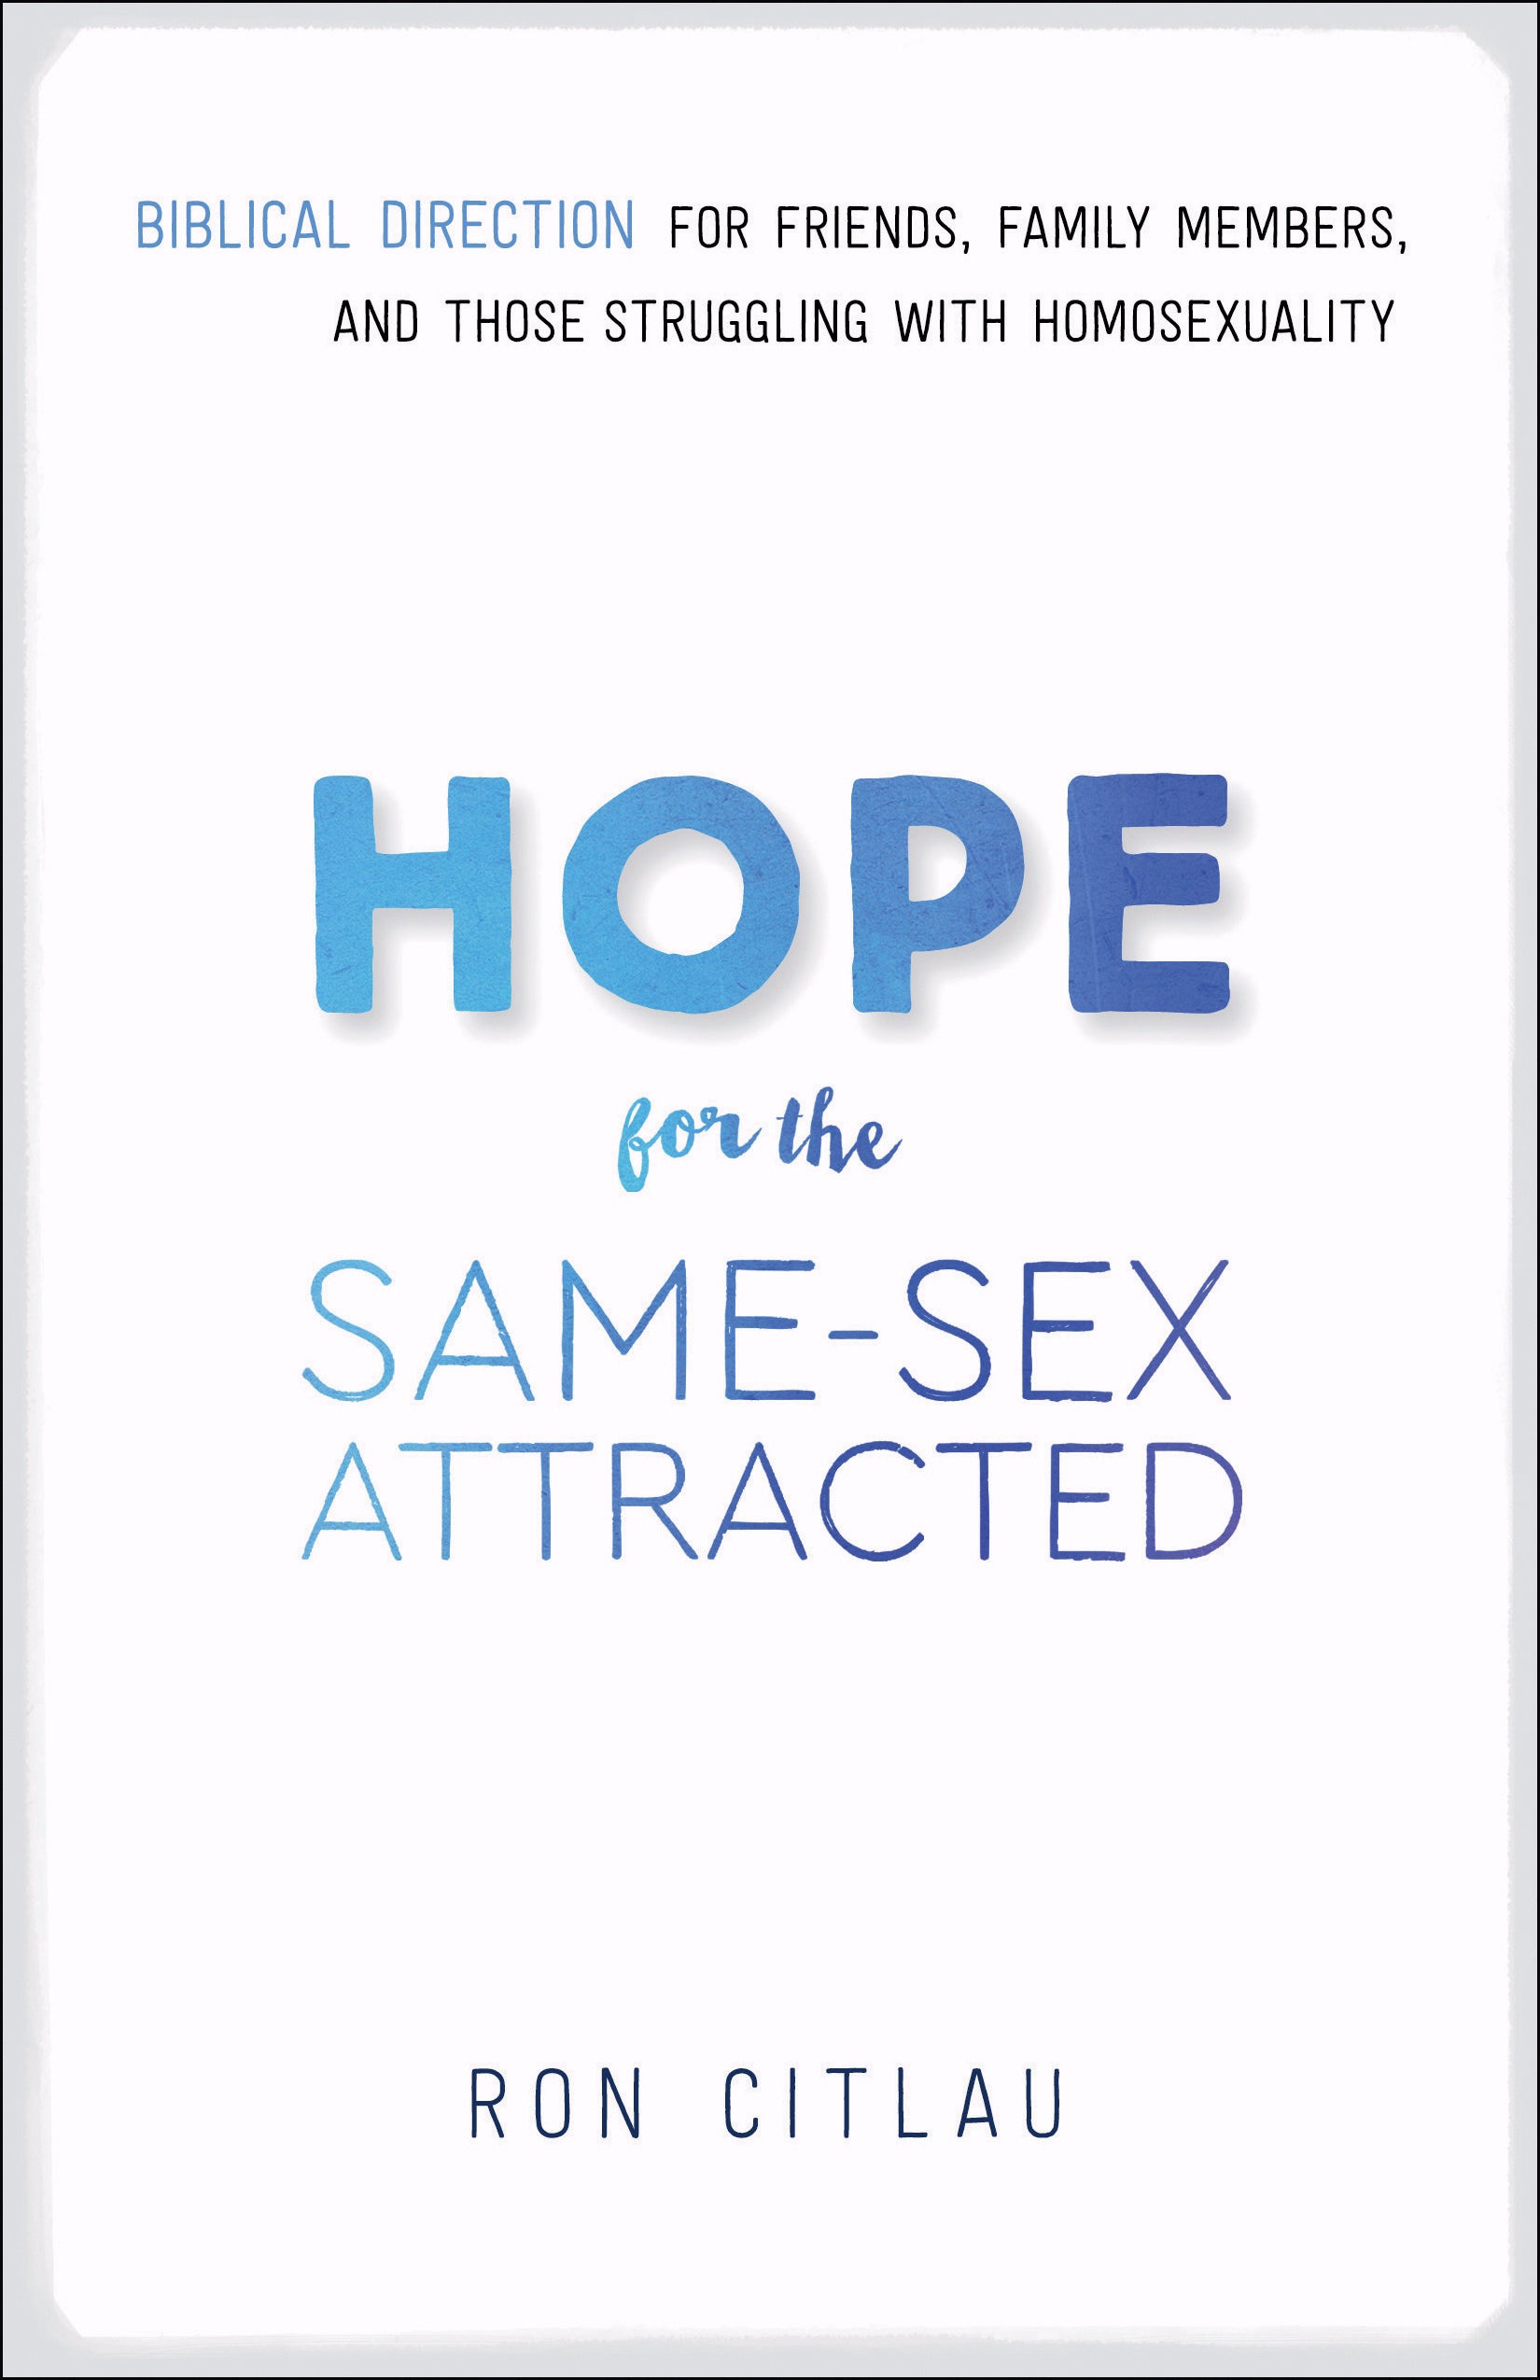 Image of Hope for the Same-Sex Attracted other